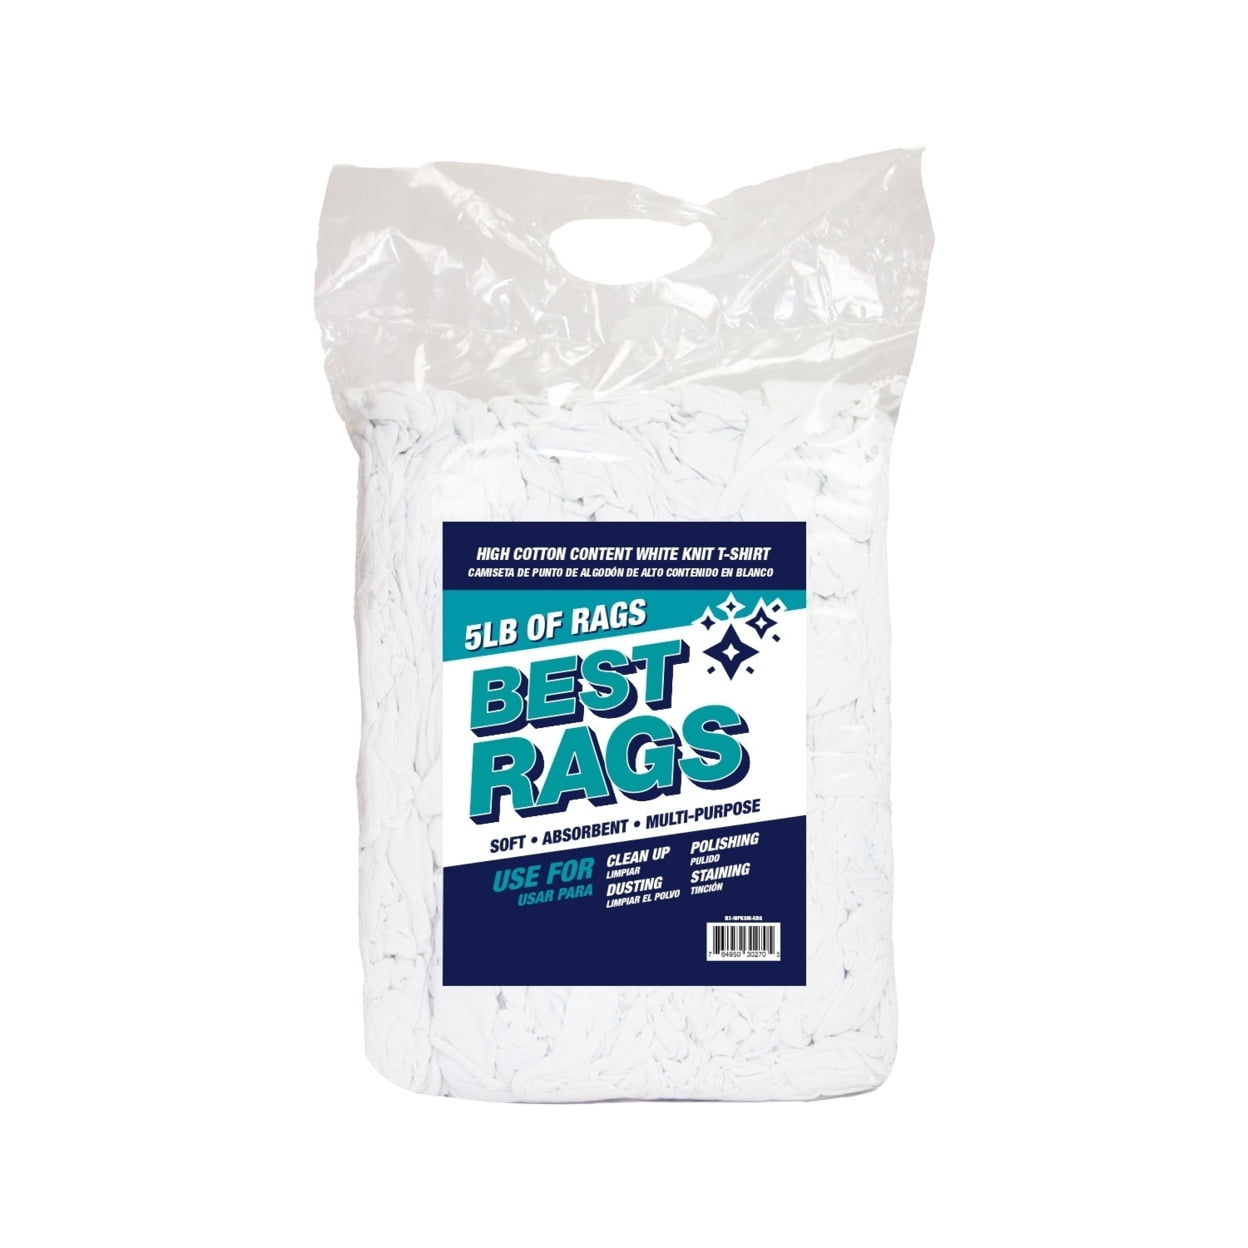 Pro-Clean Basics Recycled Cleaning T-Shirt Cloth Rags, Lint-Free, 100%  Cotton, 15 lb. at Tractor Supply Co.